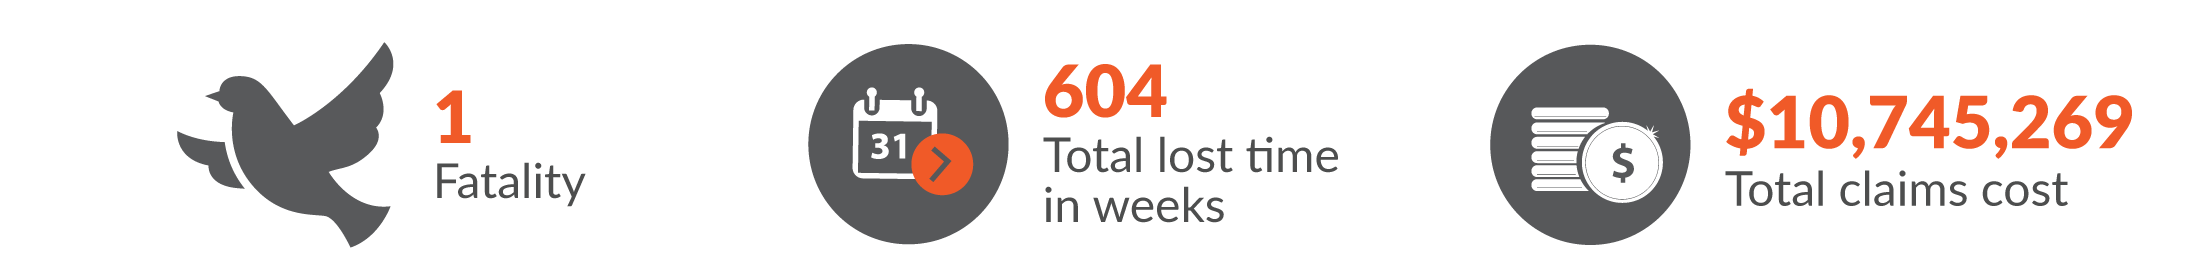 This infographic shows there was one work-related fatality in Government administration & defence and the total workers compensation claims resulted in 604 total lost time in weeks and $10,745,269 was paid in benefits.